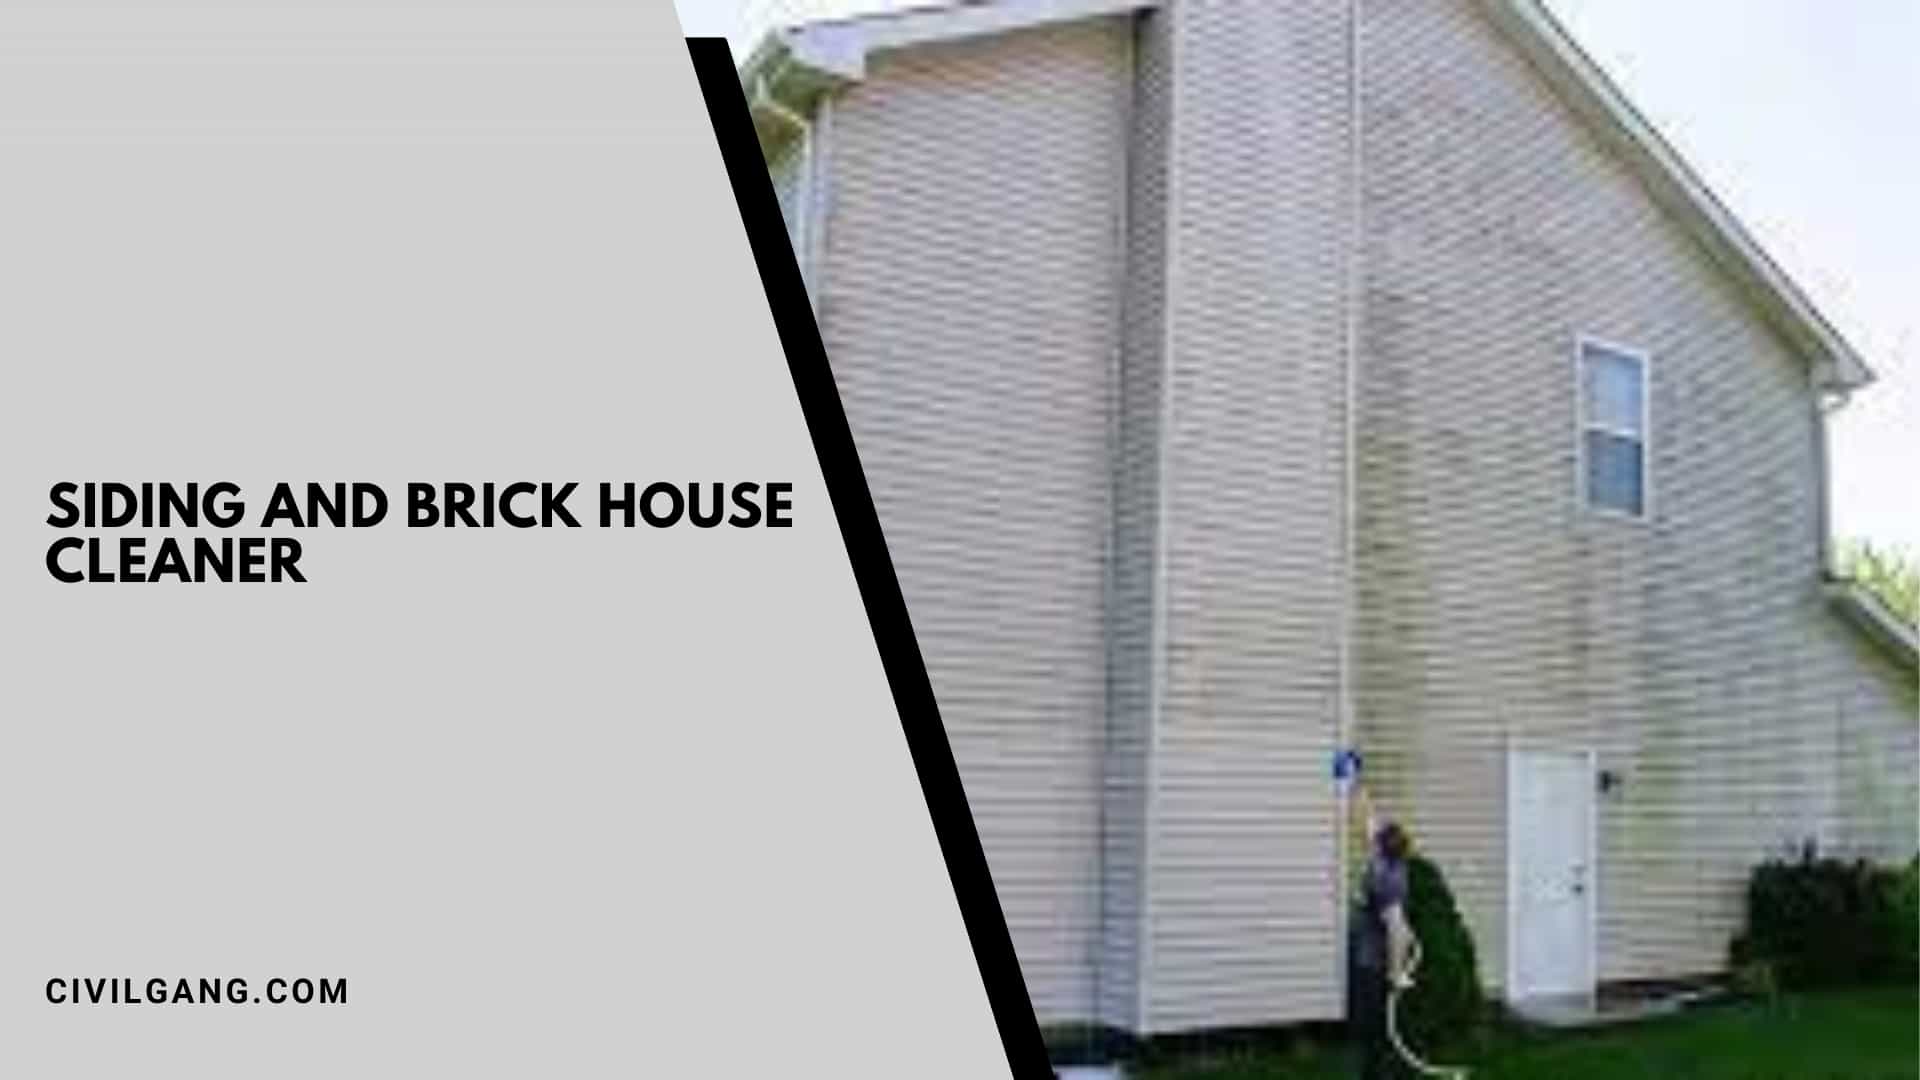 Siding and Brick House Cleaner